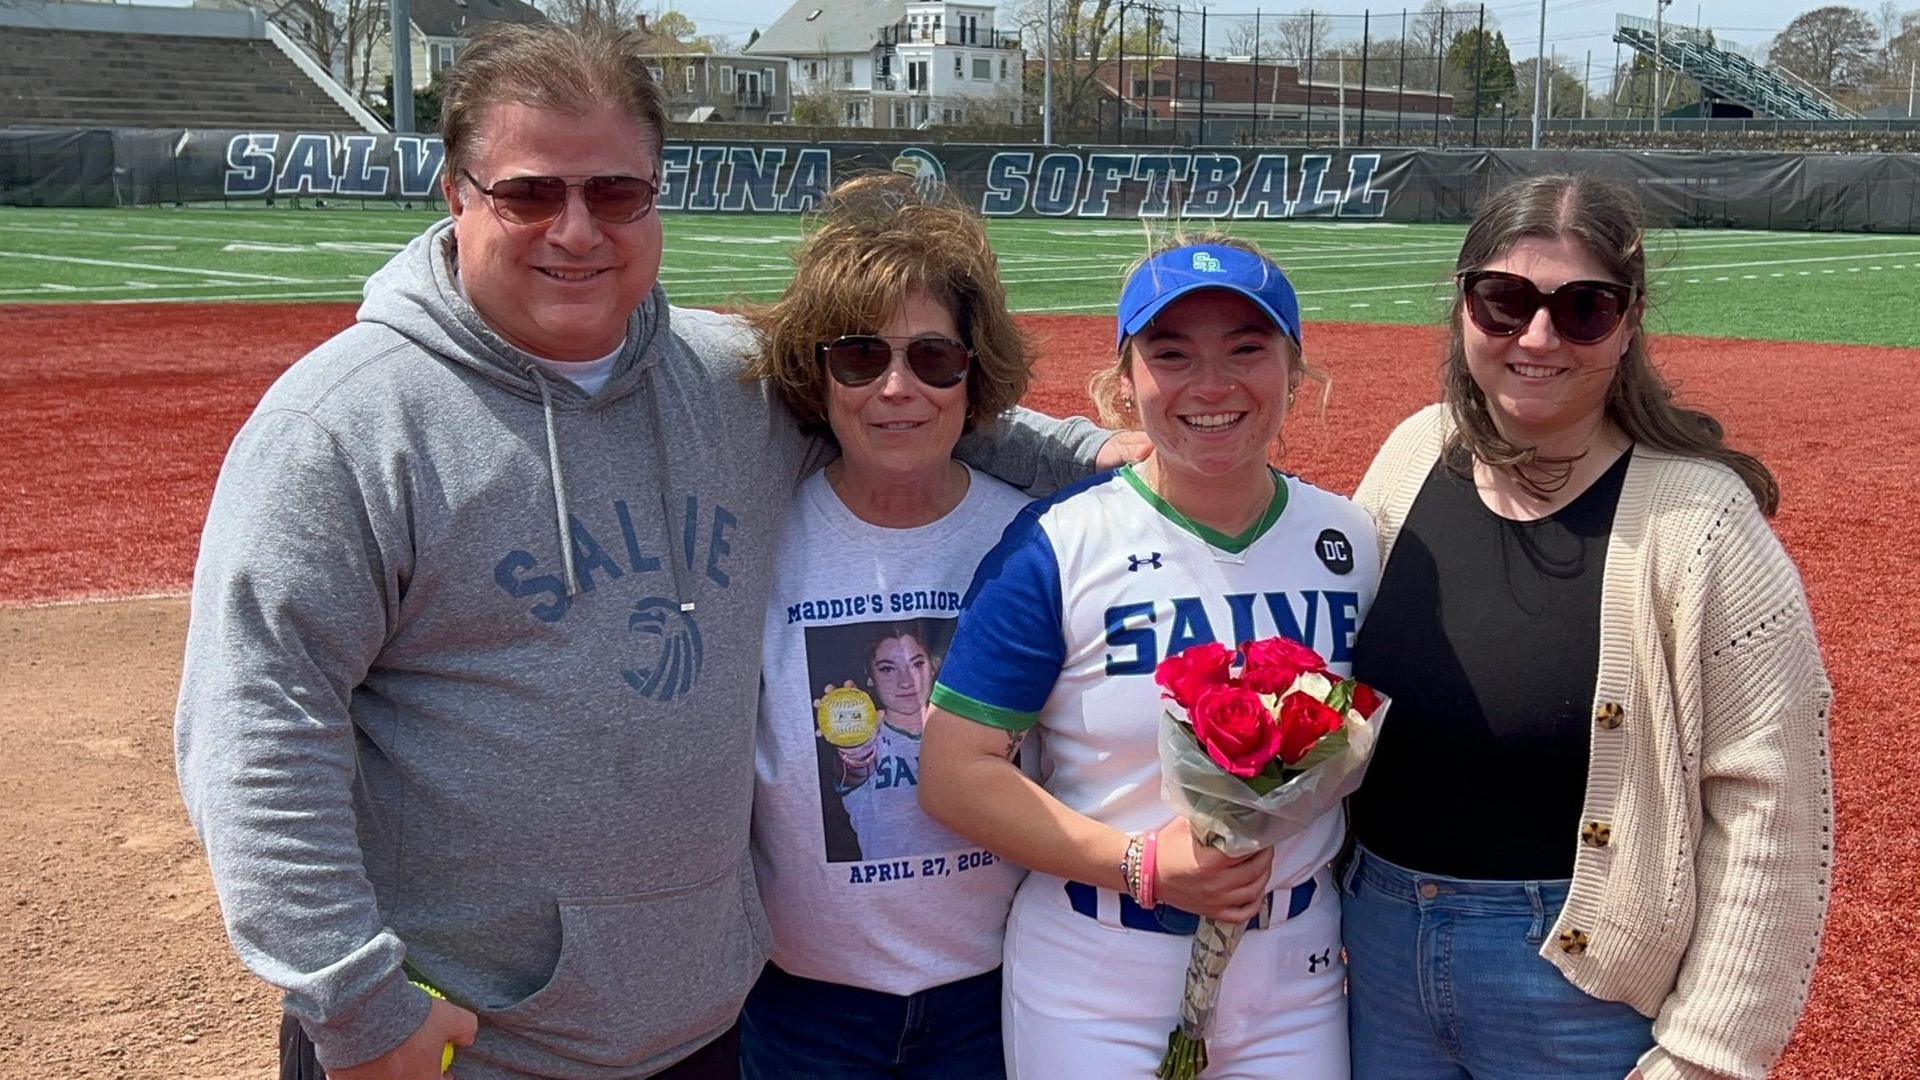 Seahawk senior Maddie Capetta is joined on the diamond by her family (father-Michael, mother-Marisa, sister-Maria) during pre-game ceremonies. (Photo by Ed Habershaw '03M)